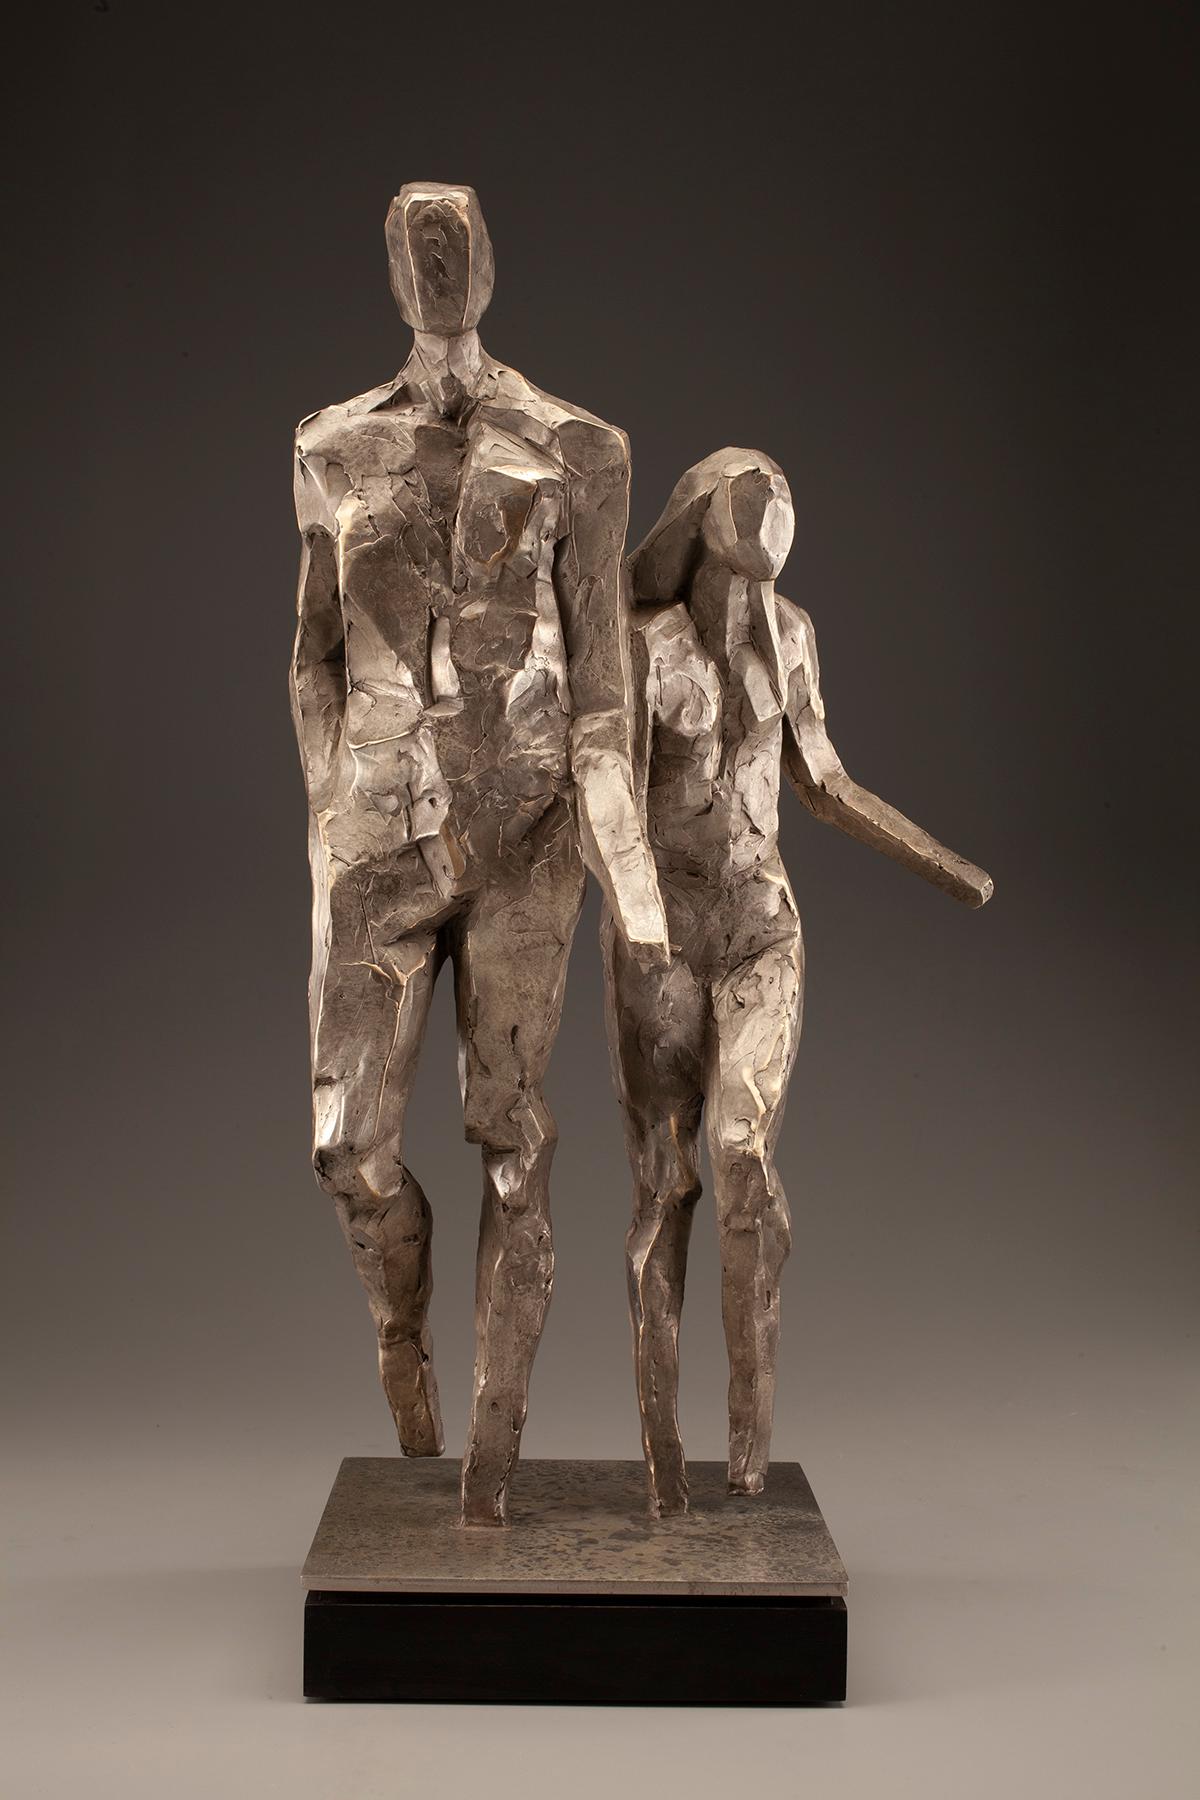 Sibs 2/9 - Sculpture by Gail Folwell